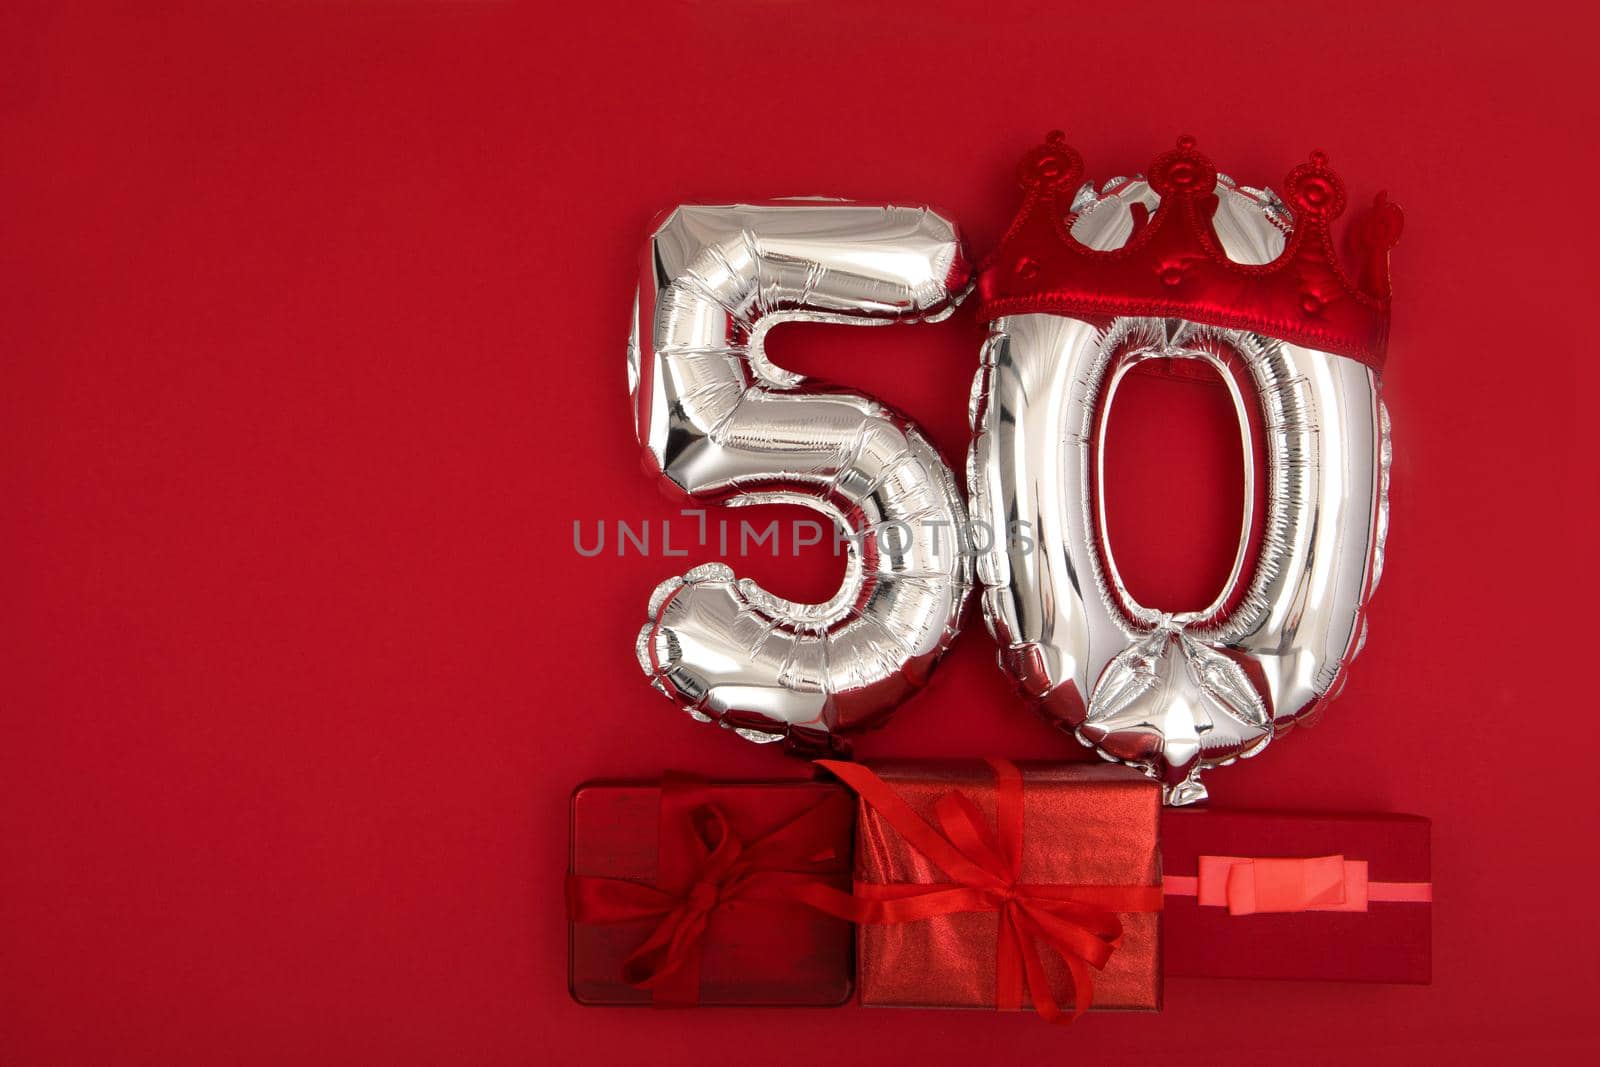 Balloon 50 in crown on dark red background flat lay by Demkat